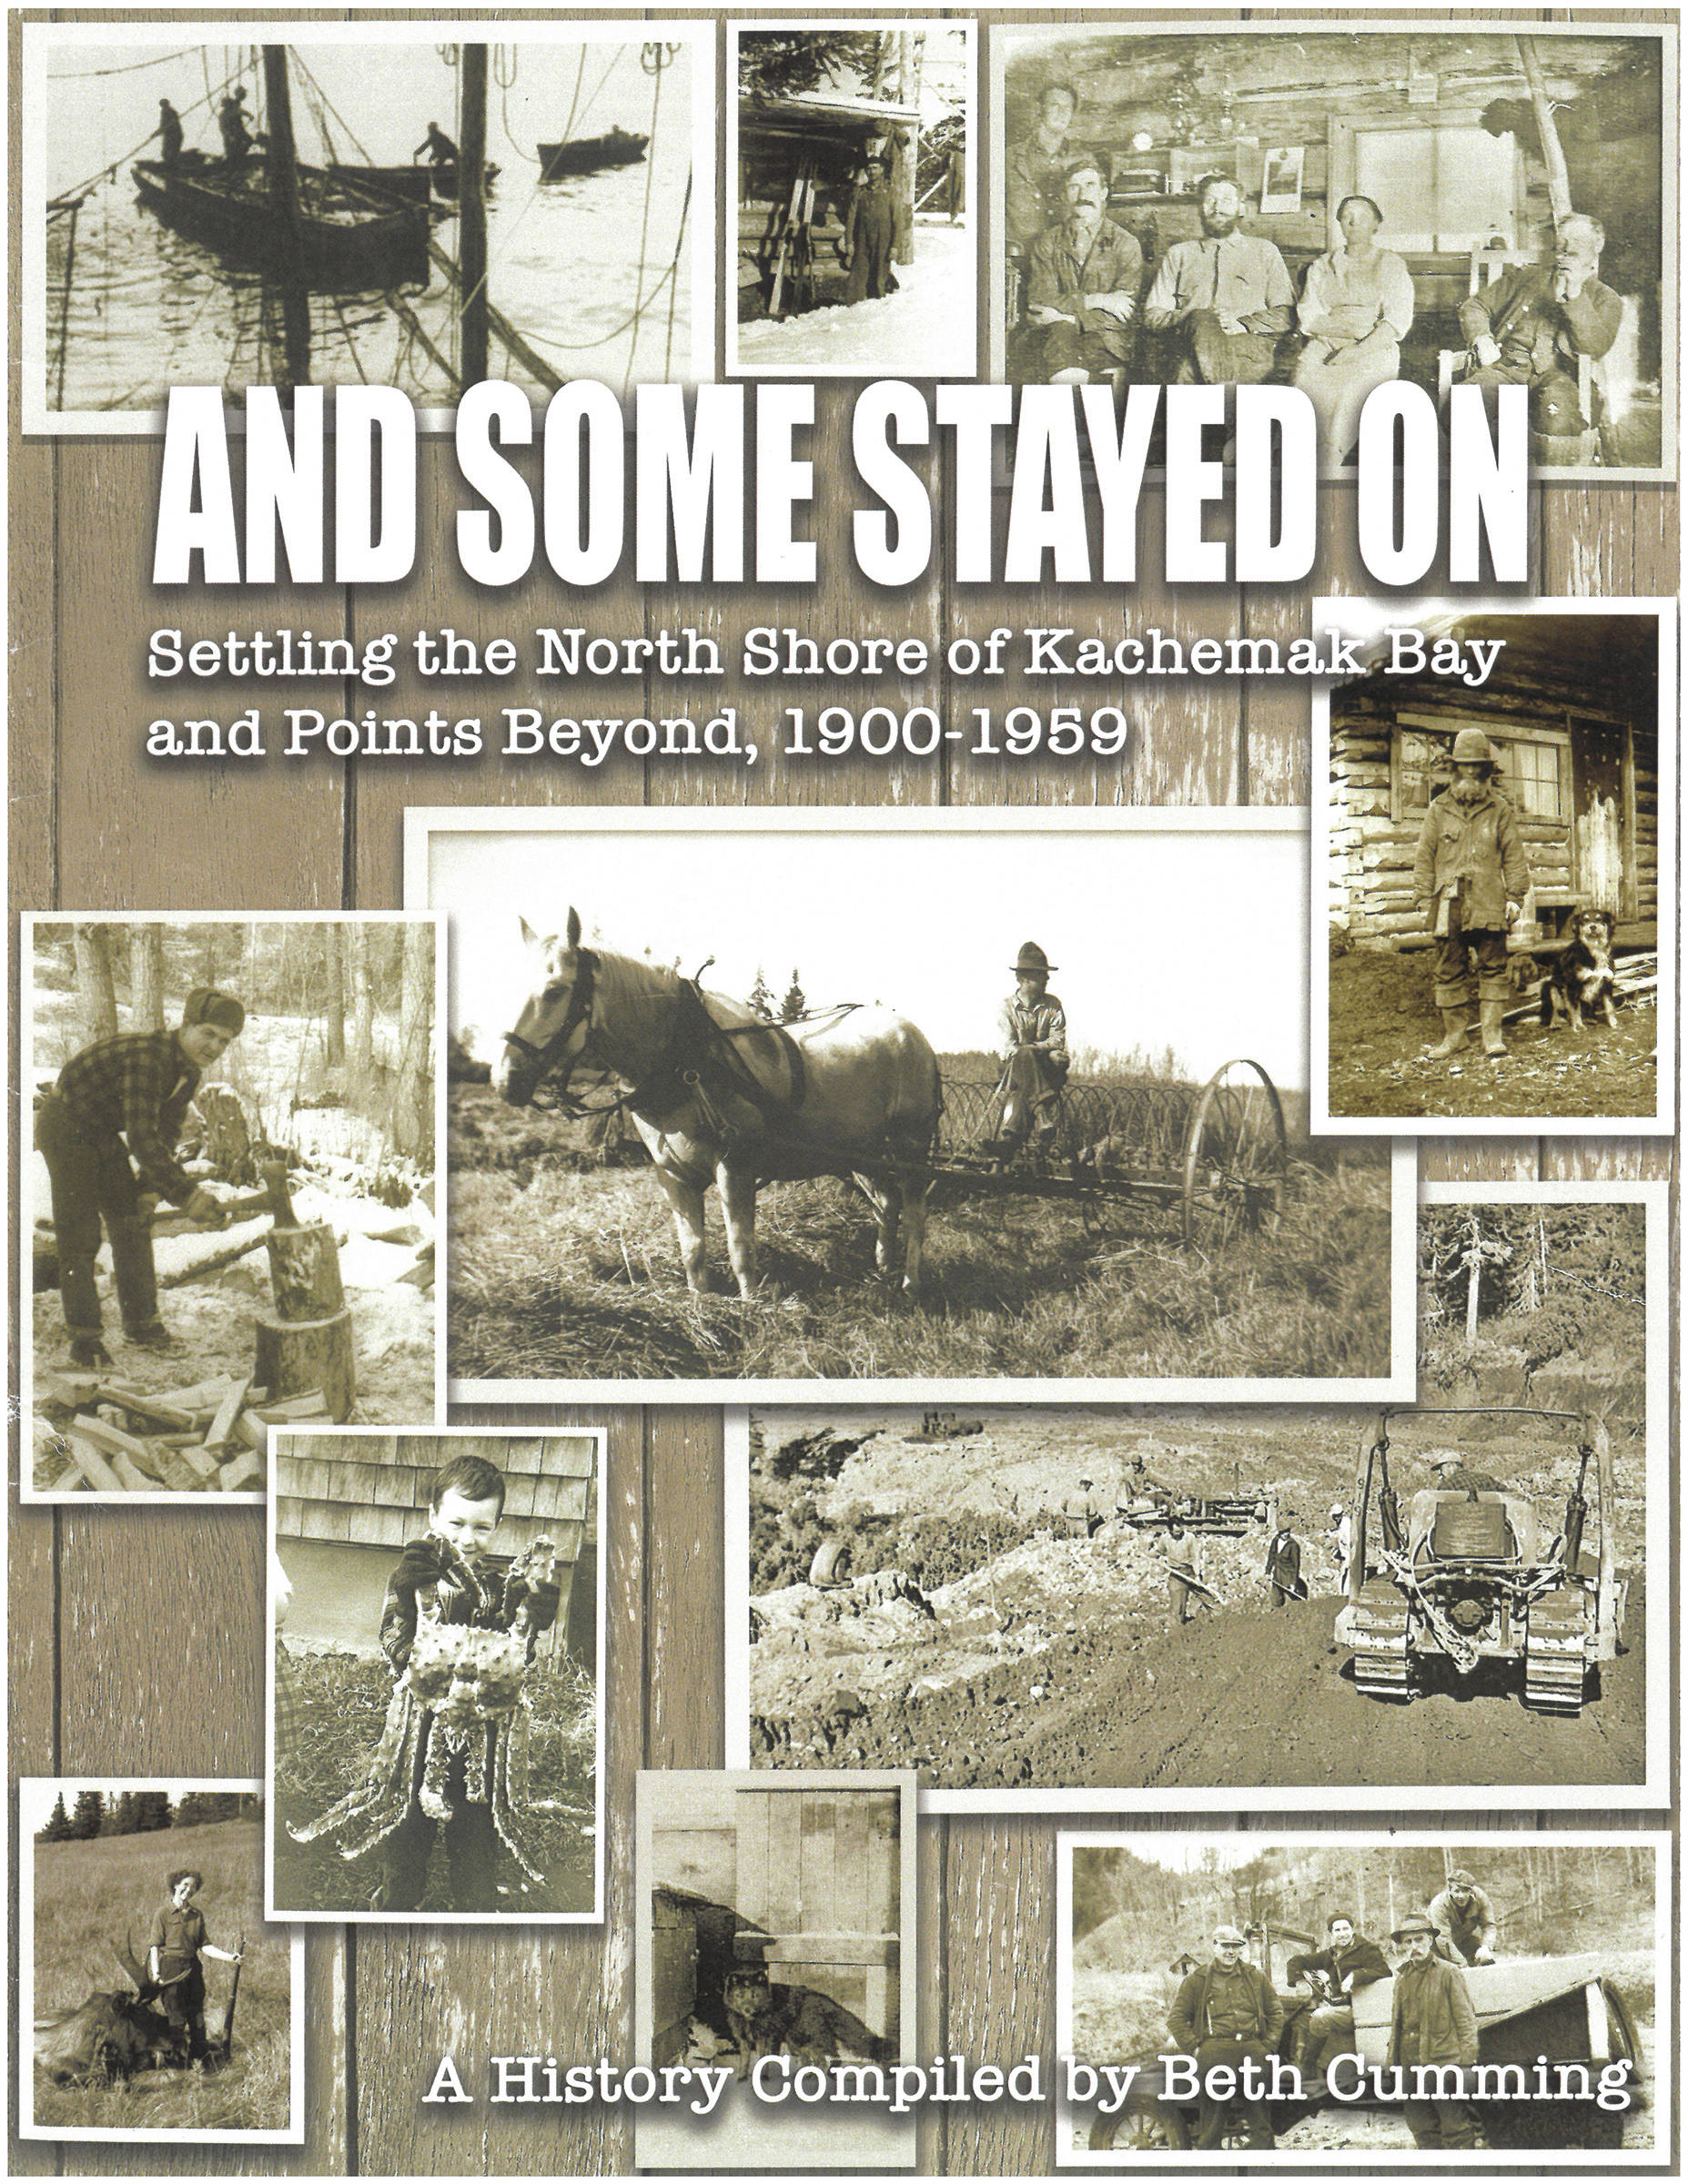 The front cover of “And Some Stayed On: Settling the North Shore of Kachemak Bay and Points Beyond, 1900-1959,” compiled by Beth Cumming (Pratt Museum, 2019).